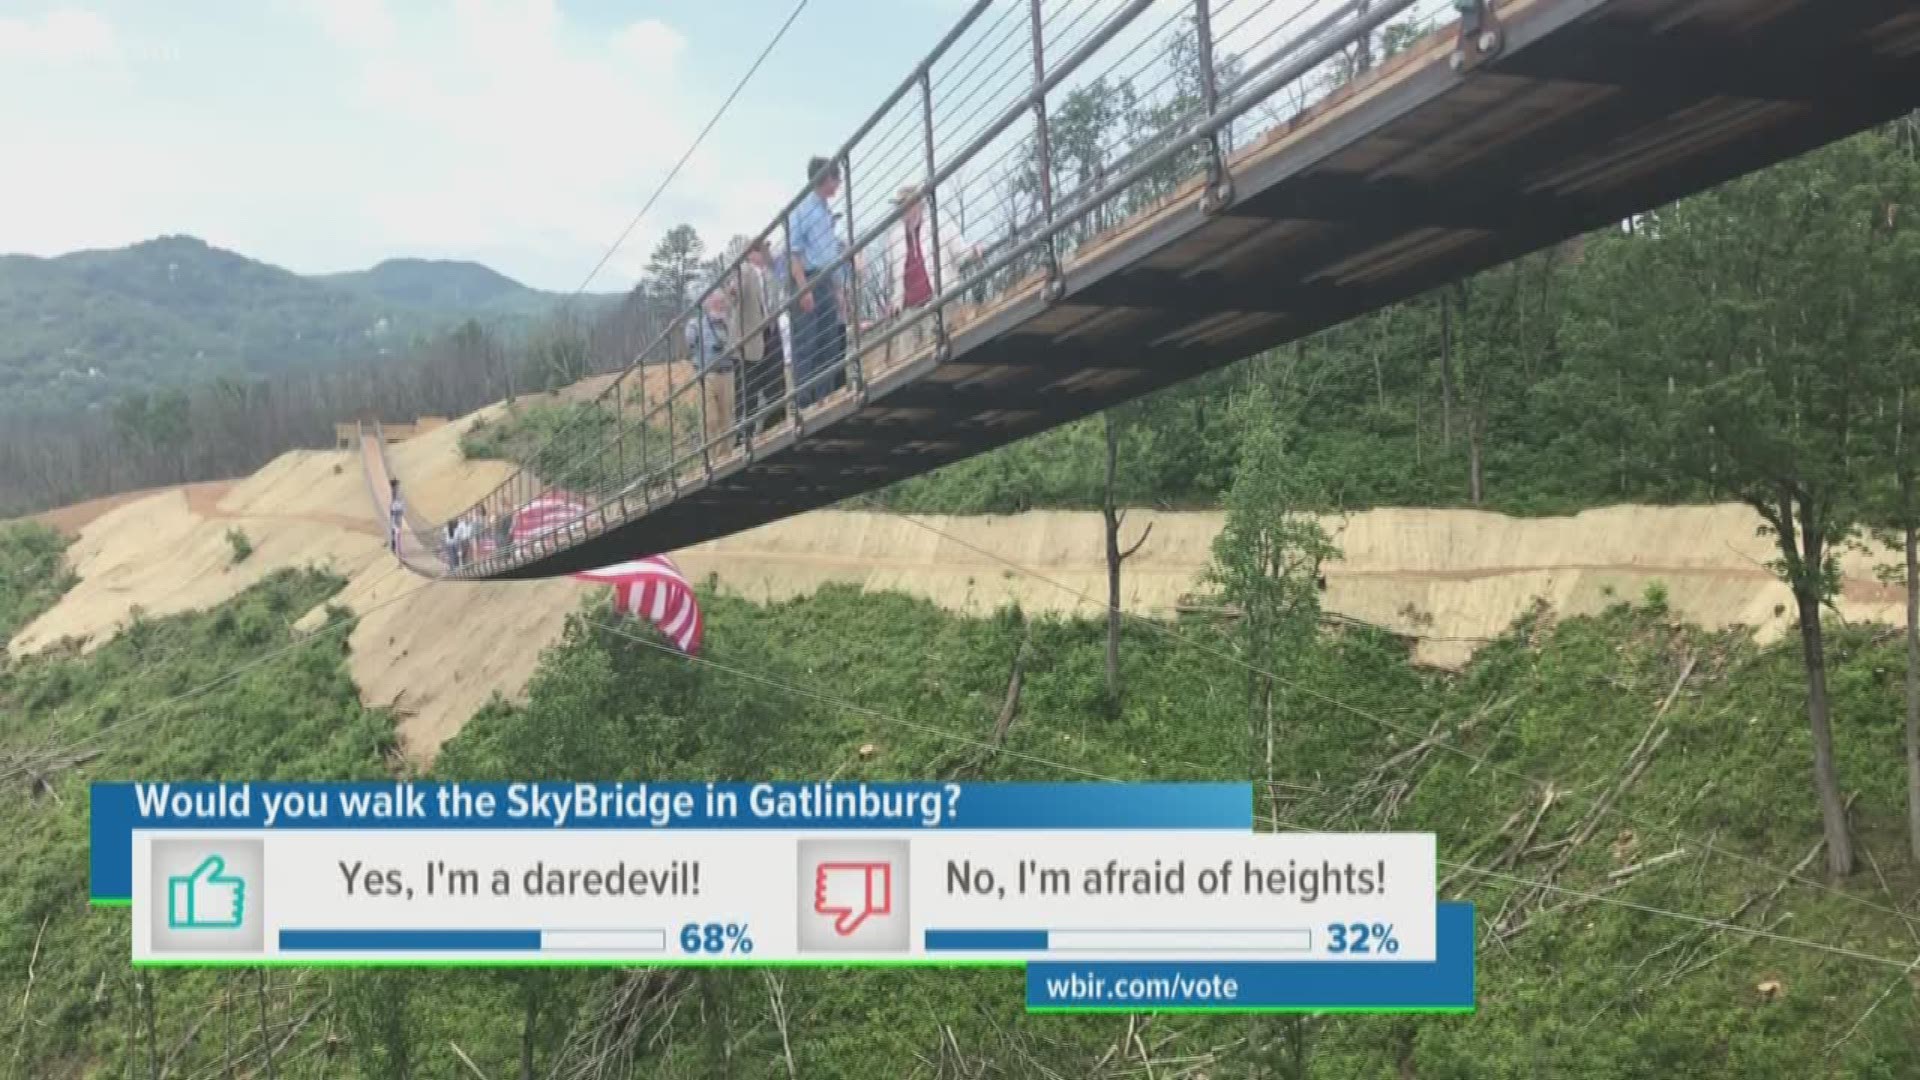 It's considered the longest pedestrian suspension bridge in the United States.  The Skybridge in Gatlinburg is now open!